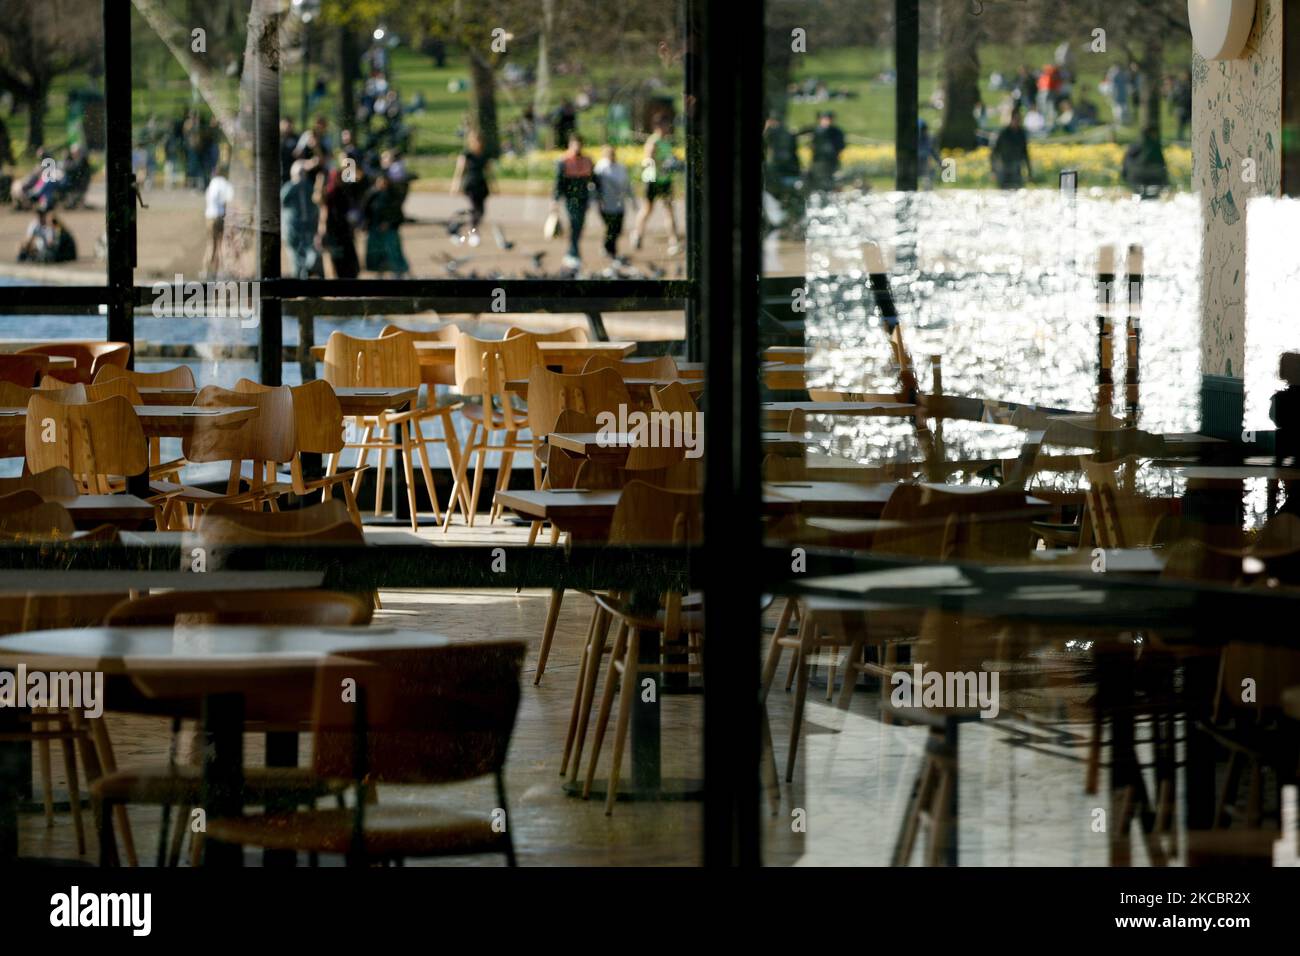 Empty tables are seen in the indoor area of a temporarily-closed cafe beside the Serpentine lake in Hyde Park in London, England, on March 29, 2021. Lockdown restrictions were eased across England today, with the 'stay home' rule ended, groups of up to six allowed to meet outside, outdoor sports restarted and weddings with up to six people attending permitted to go ahead. Shops, hospitality and leisure businesses remain closed however, with the next relaxation of restrictions not due until April 12 at the earliest. Today's easing has meanwhile coincided with the first of a three-day 'mini-heat Stock Photo